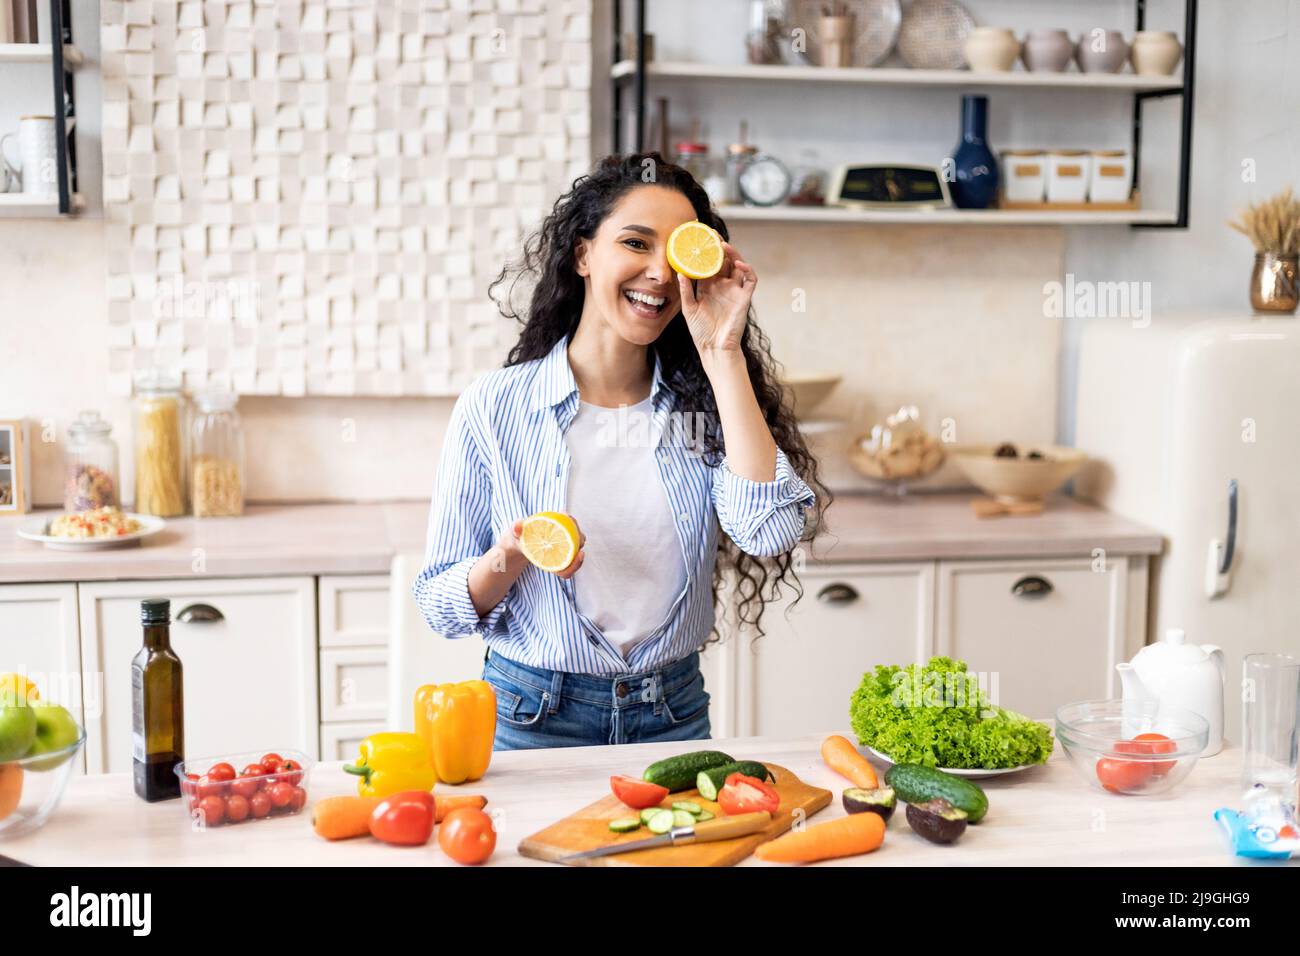 Happy young latin lady having fun and covering eyes with lemon halves, fooling around in kitchen while cooking dinner Stock Photo